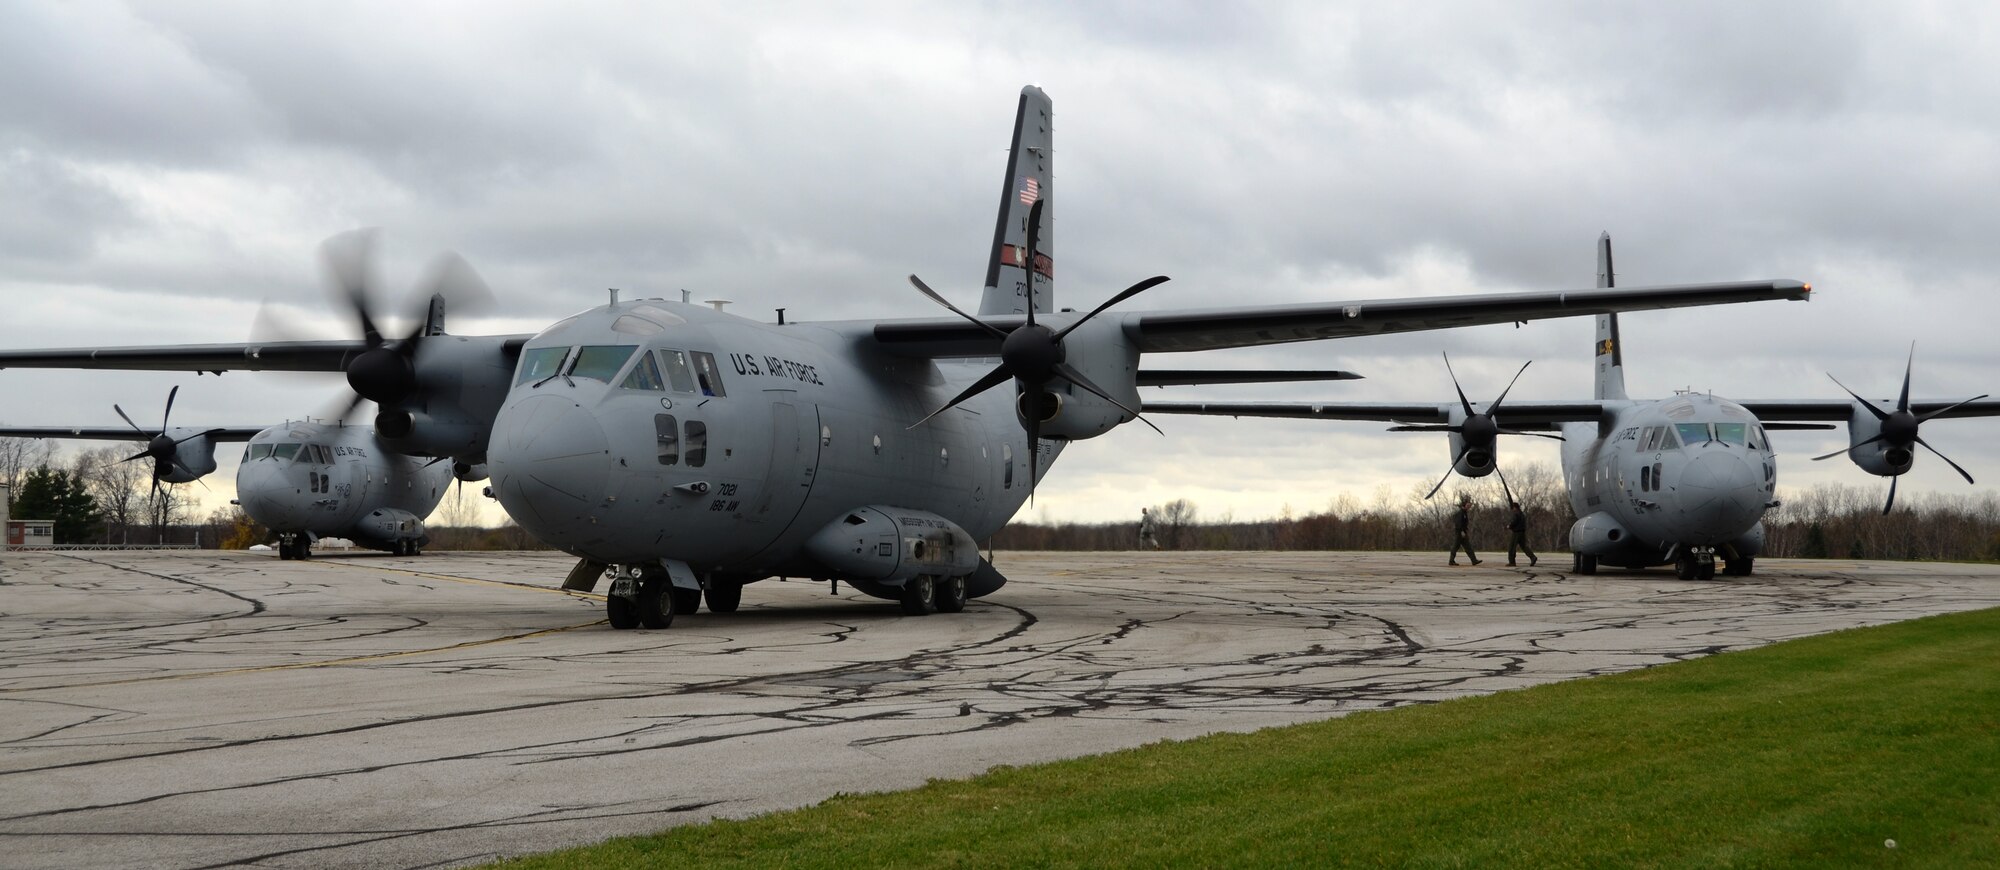 Three C-27J Spartans wait at the Akron-Canton Airport in Ohio on Saturday, November 3, 2012 to upload mission critical equipment in support of disaster relief from Hurricane Sandy. Cargo planes from Maryland, Mississippi and Ohio National Guard units transported electrical generators to be used in the New York City area. (National Guard photo by Tech. Sgt. David Speicher)